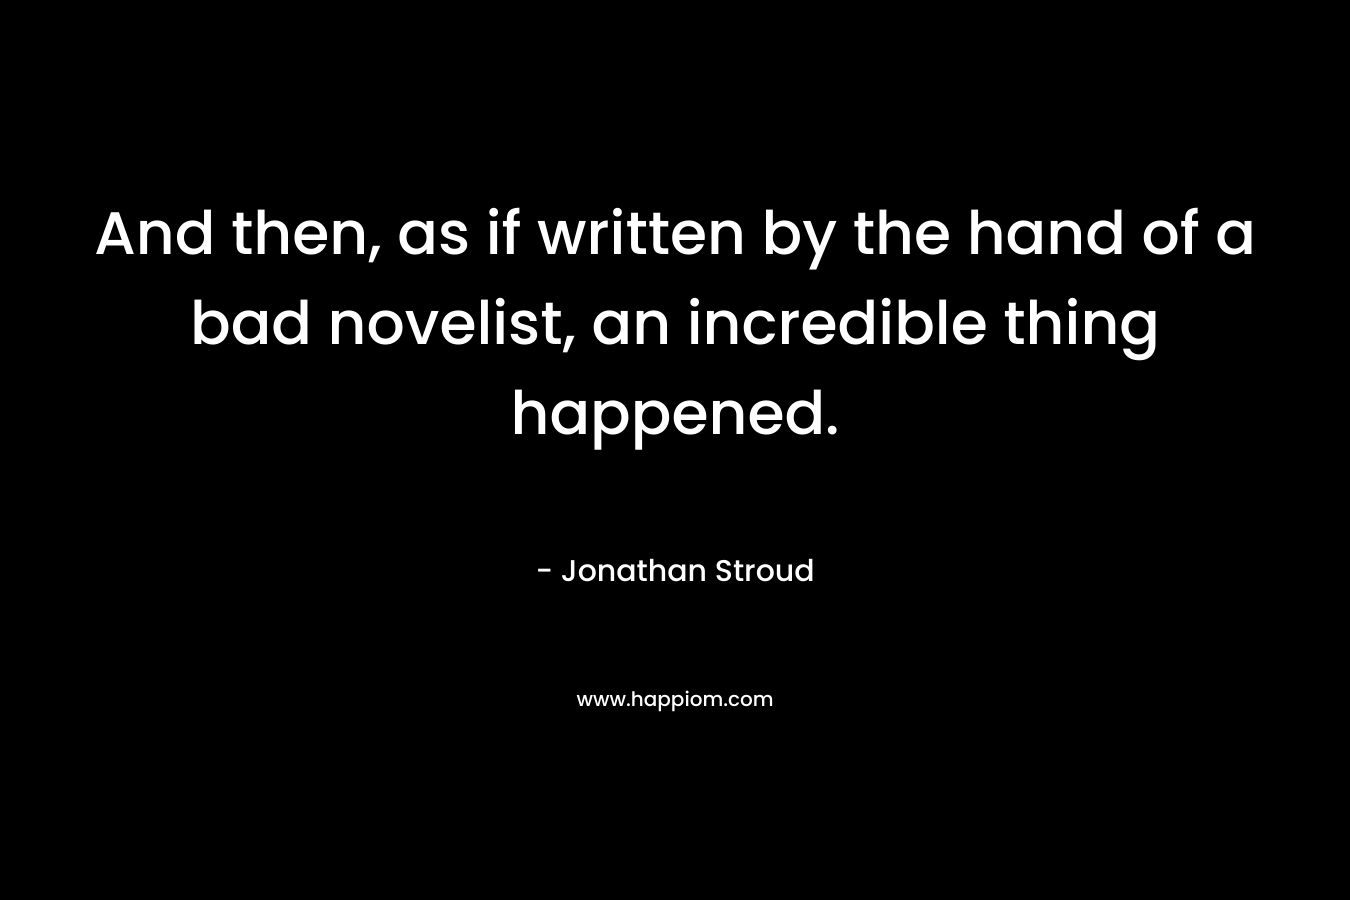 And then, as if written by the hand of a bad novelist, an incredible thing happened. – Jonathan Stroud